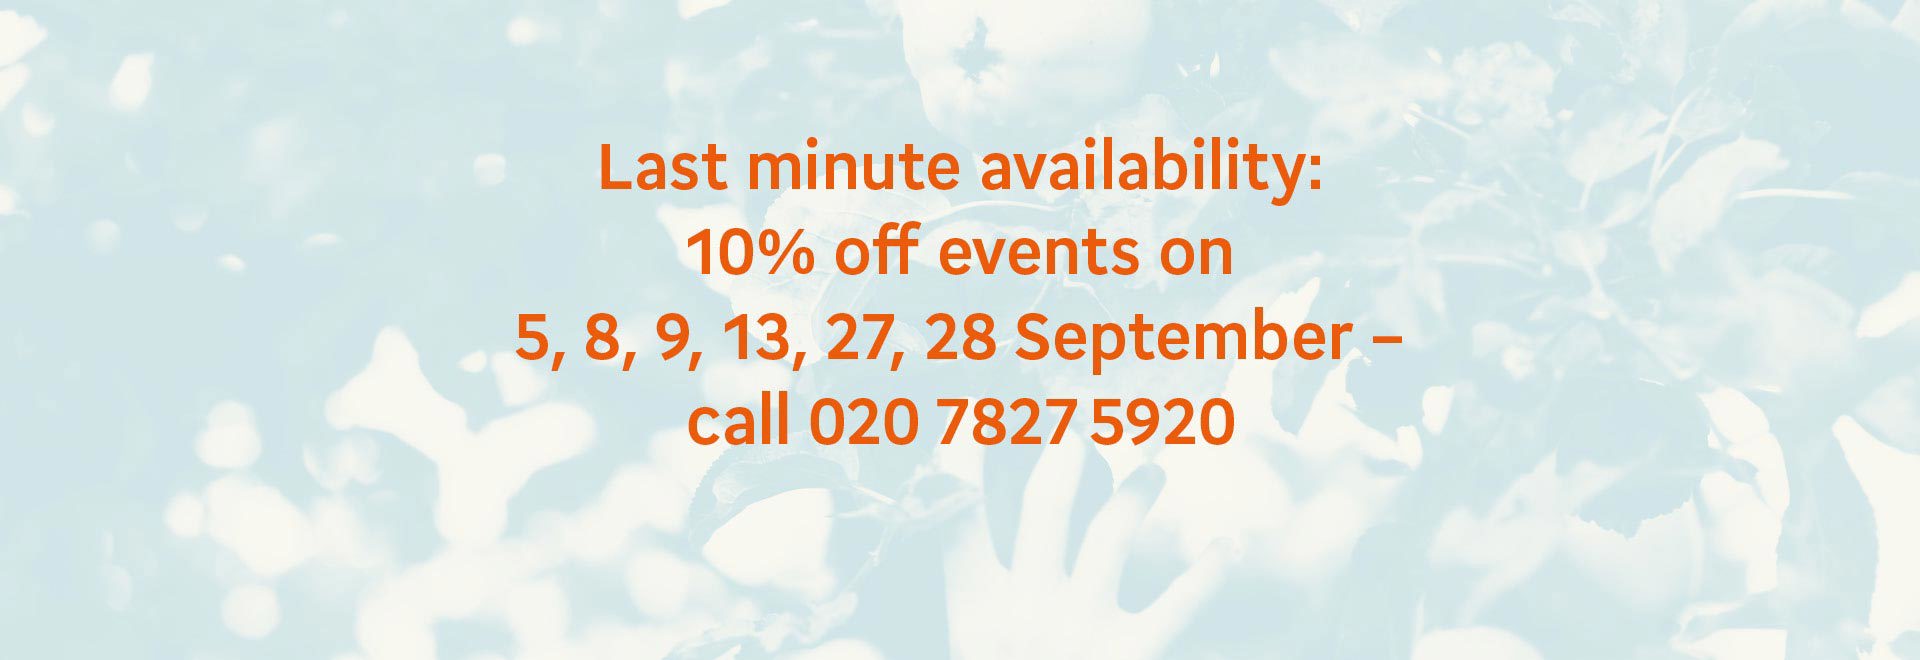 Last minute availability: 10% off events on 5, 8, 9, 13, 27, 28 September- call 020 7827 5920